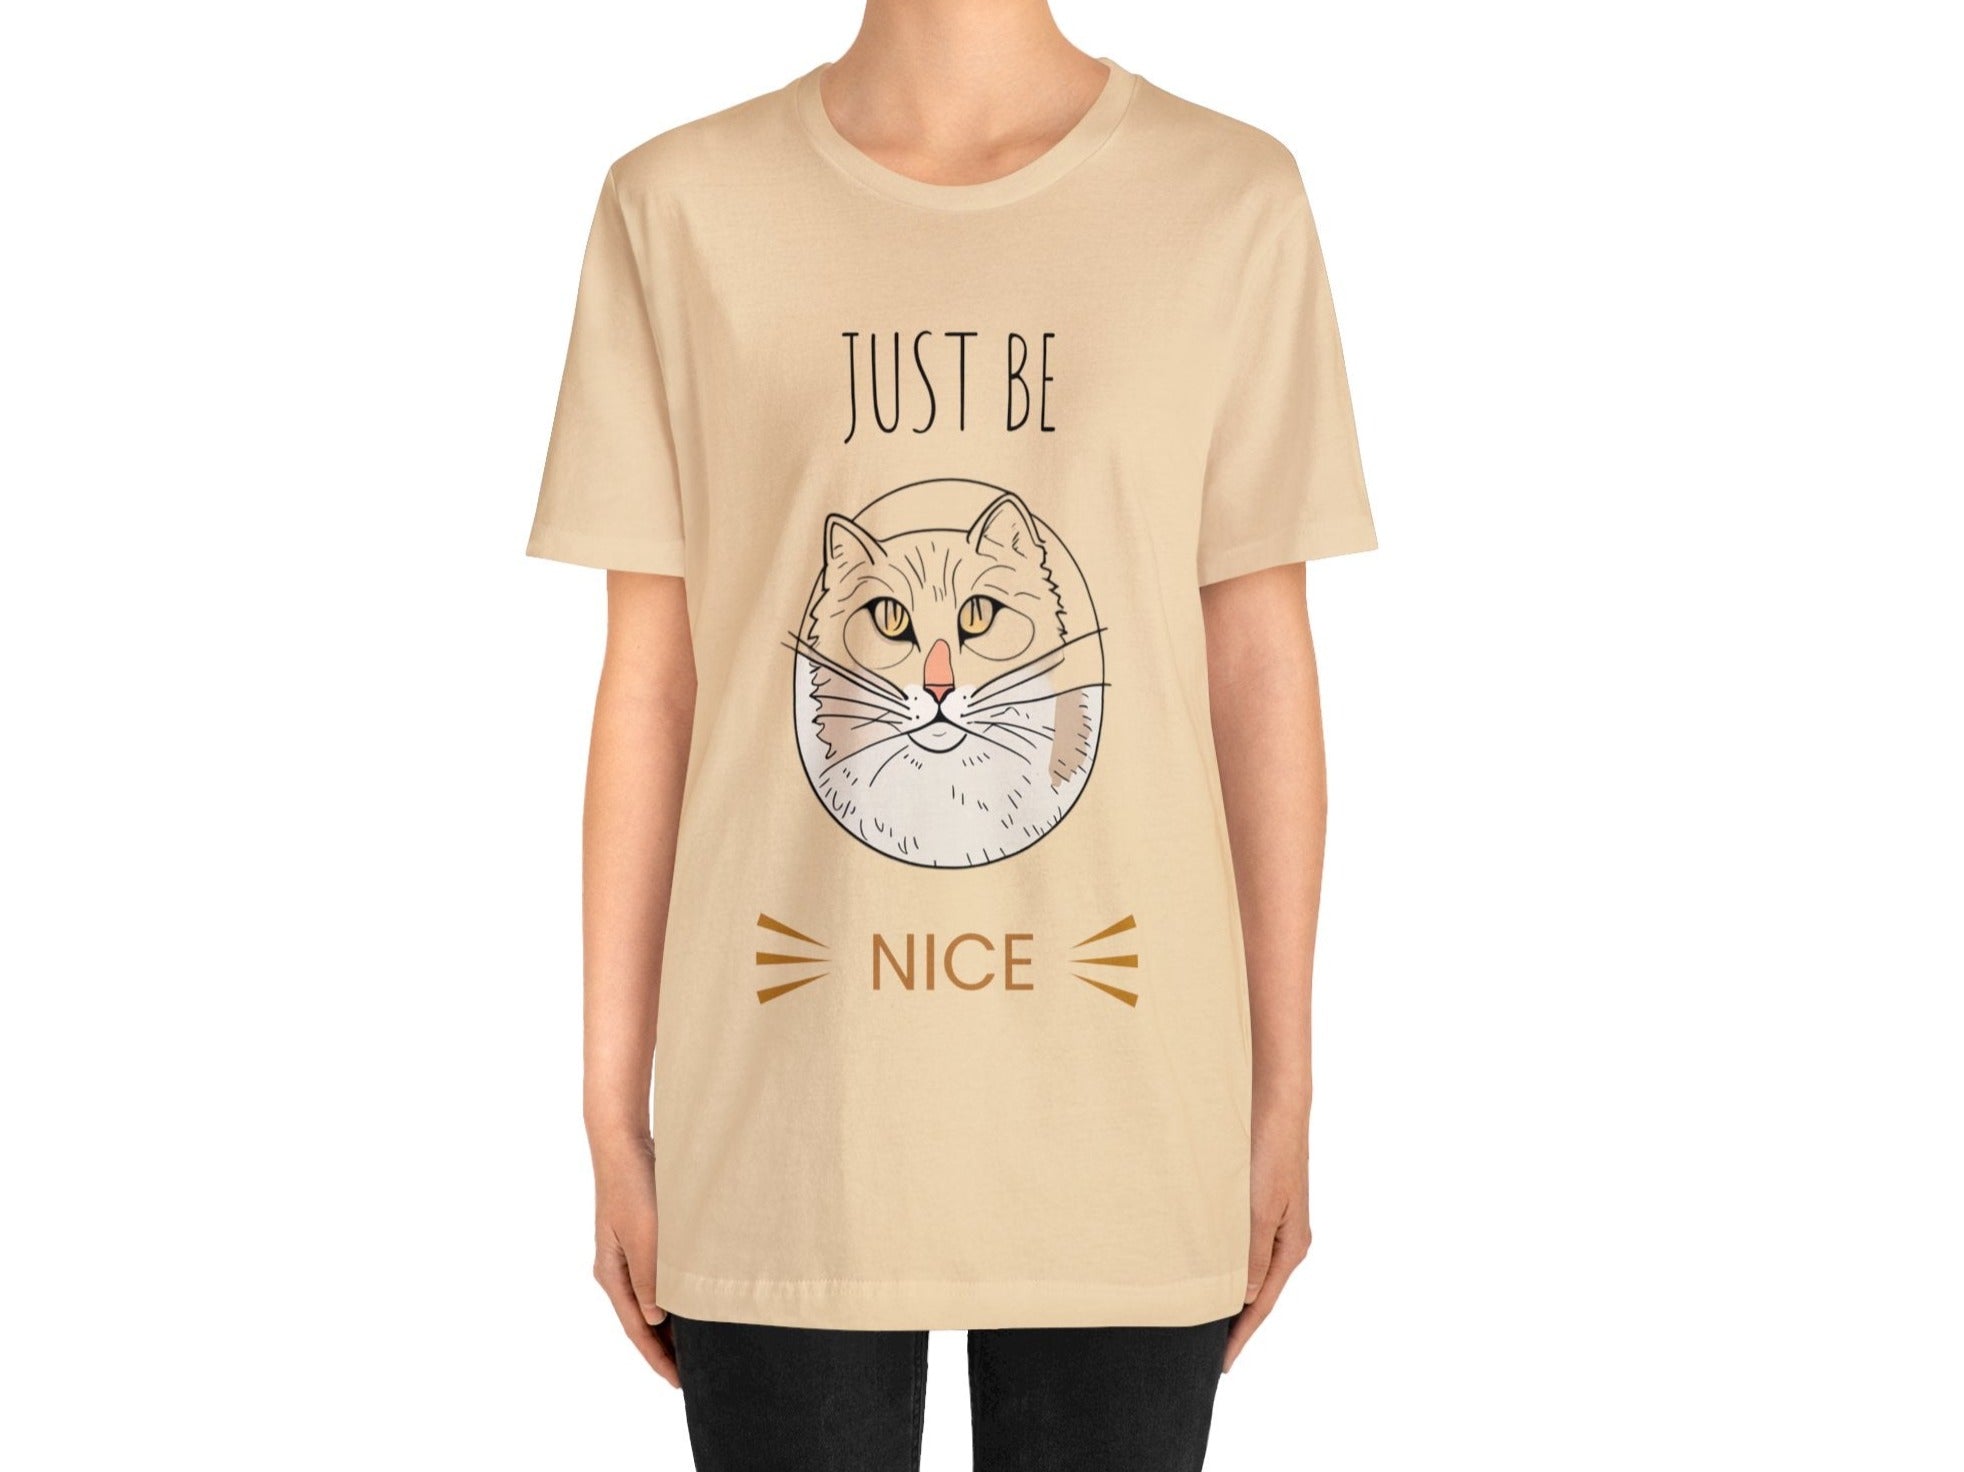 Just Be Nice T-Shirt